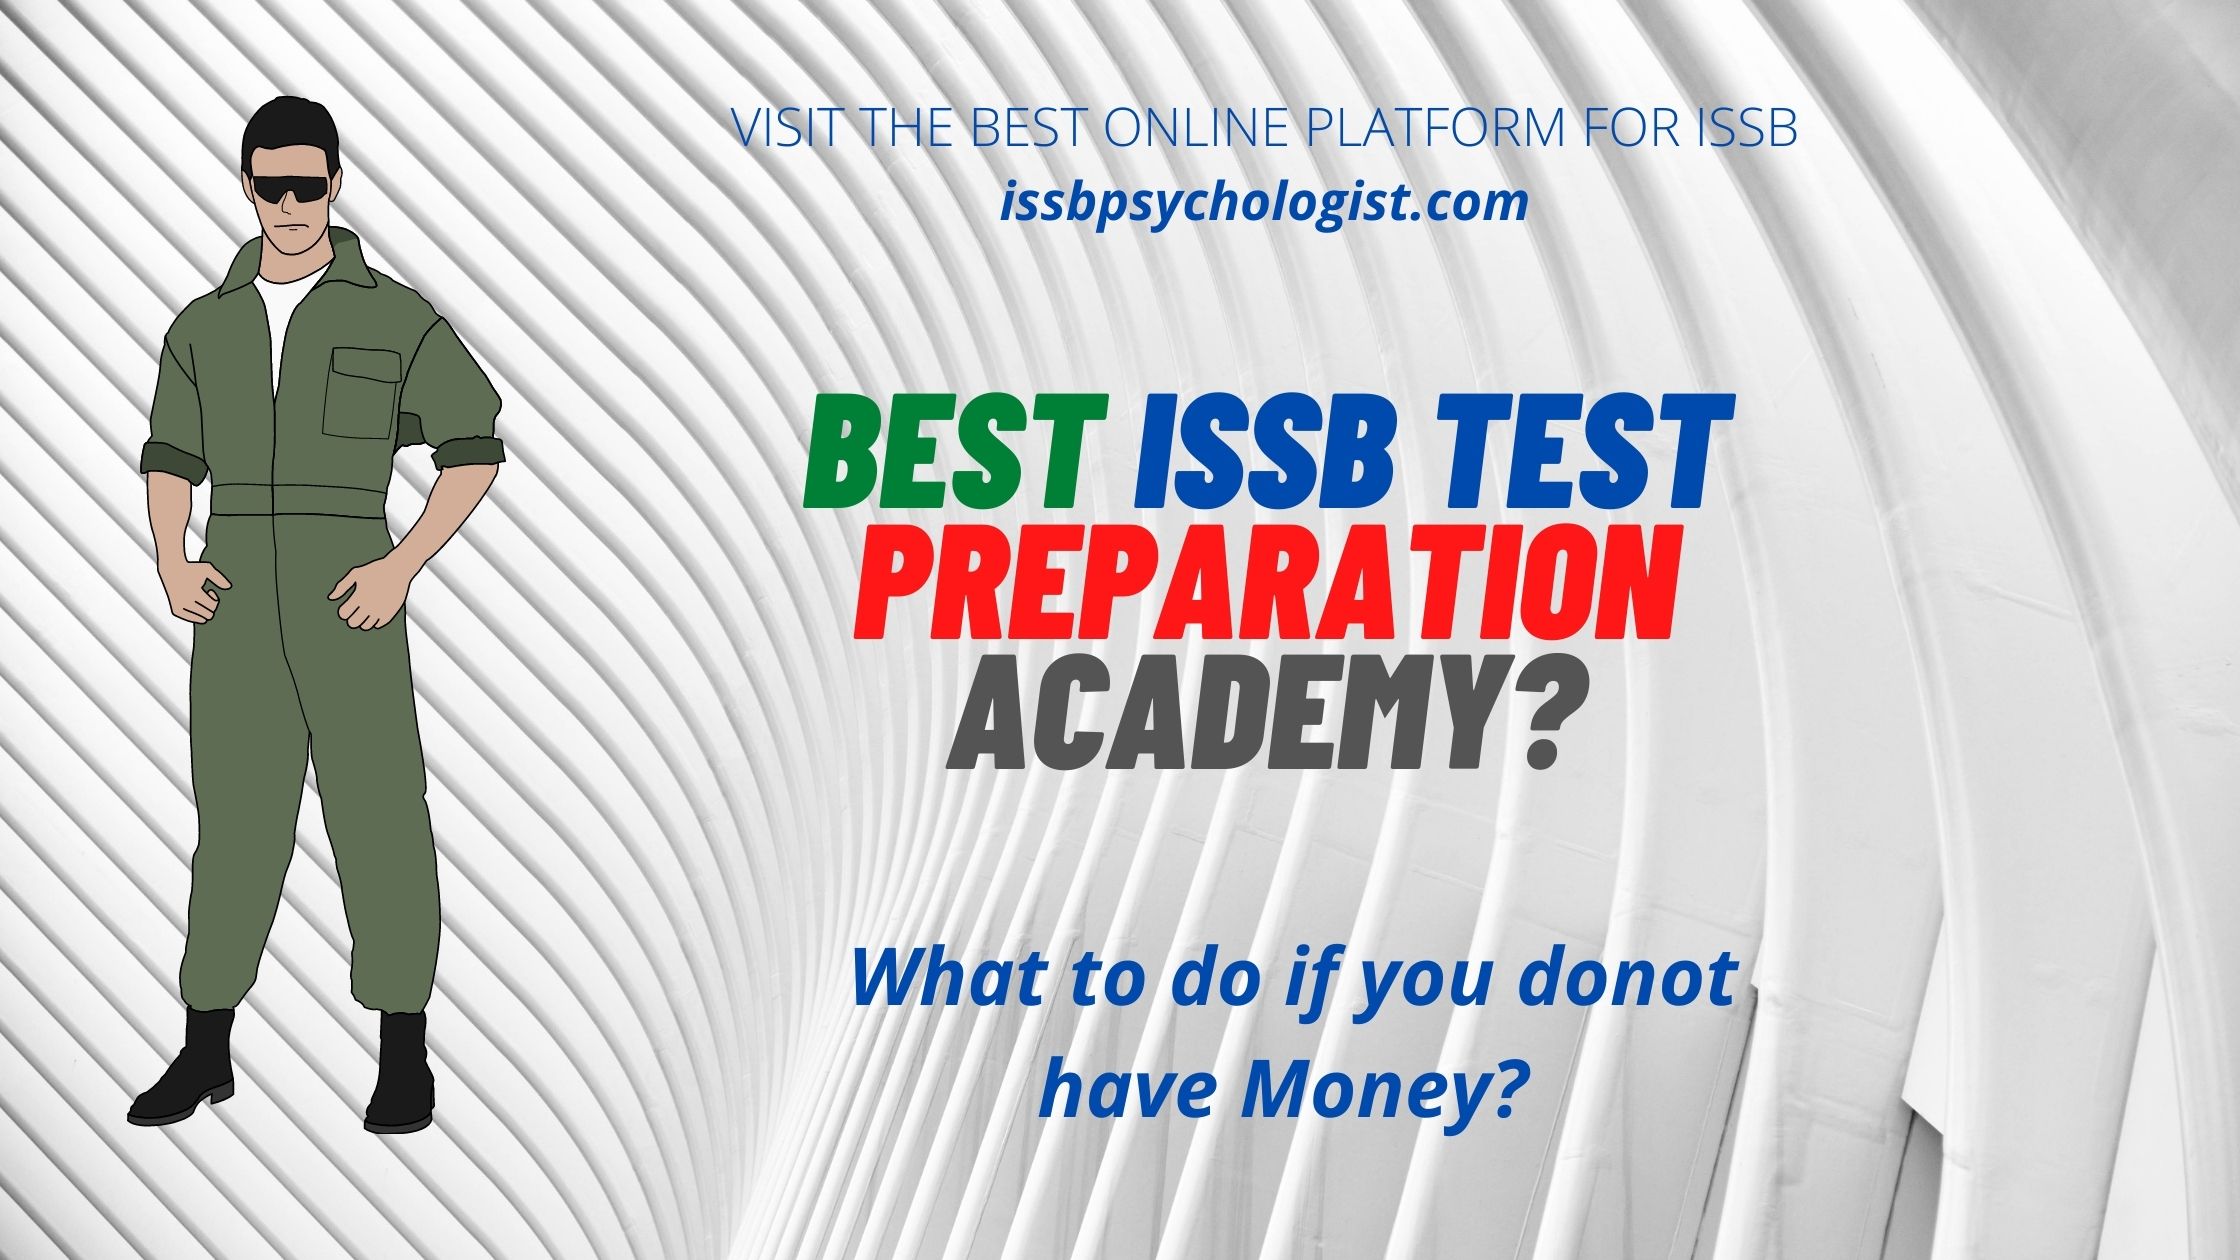 did-academy-really-help-in-issb-selection-i-do-not-have-extra-money-to-join-any-academy-how